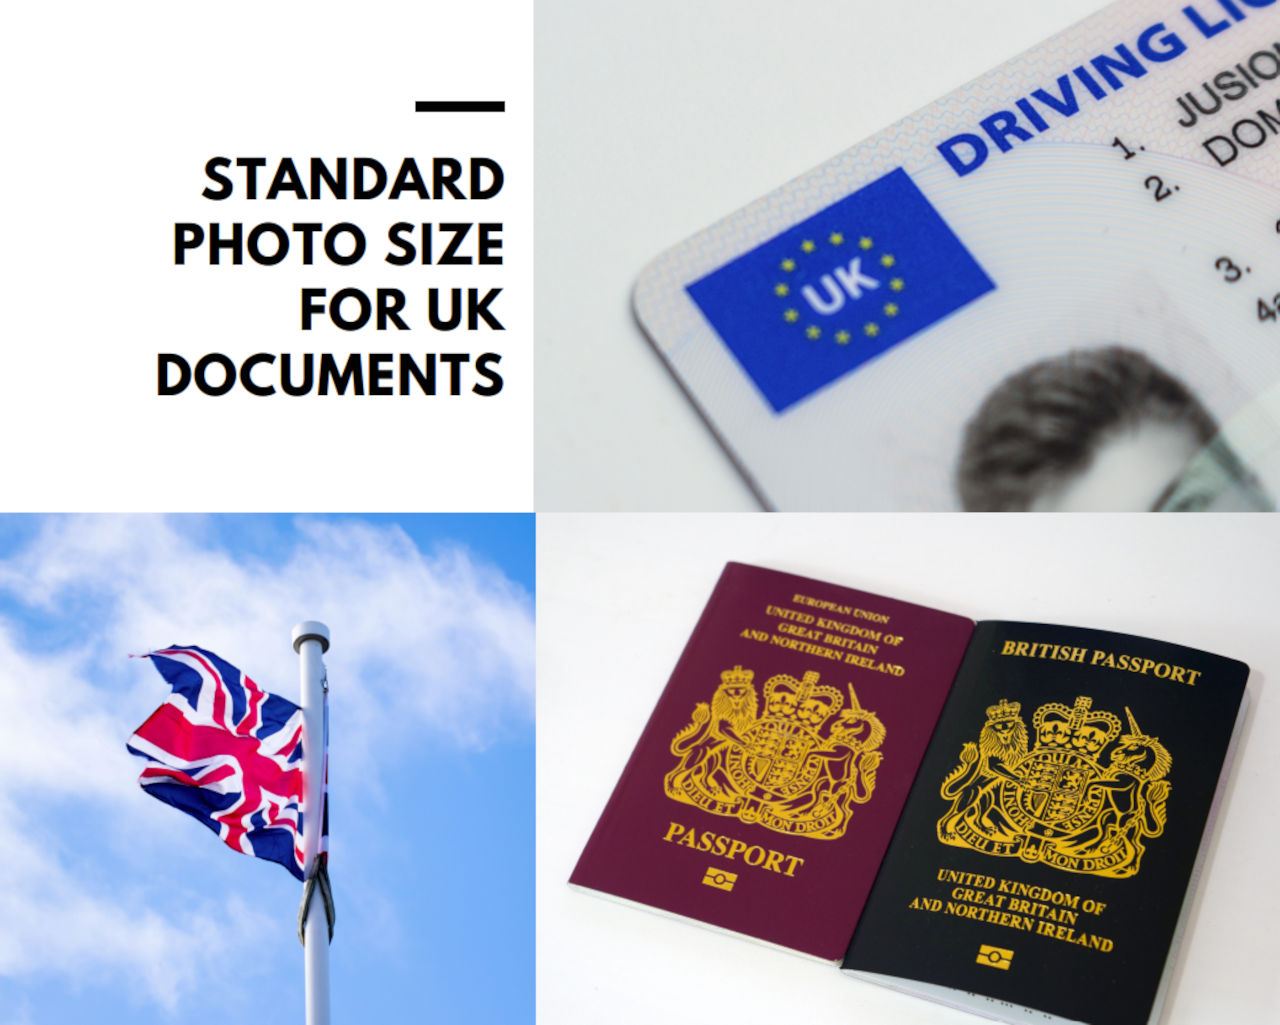 Standard photo size for UK documents